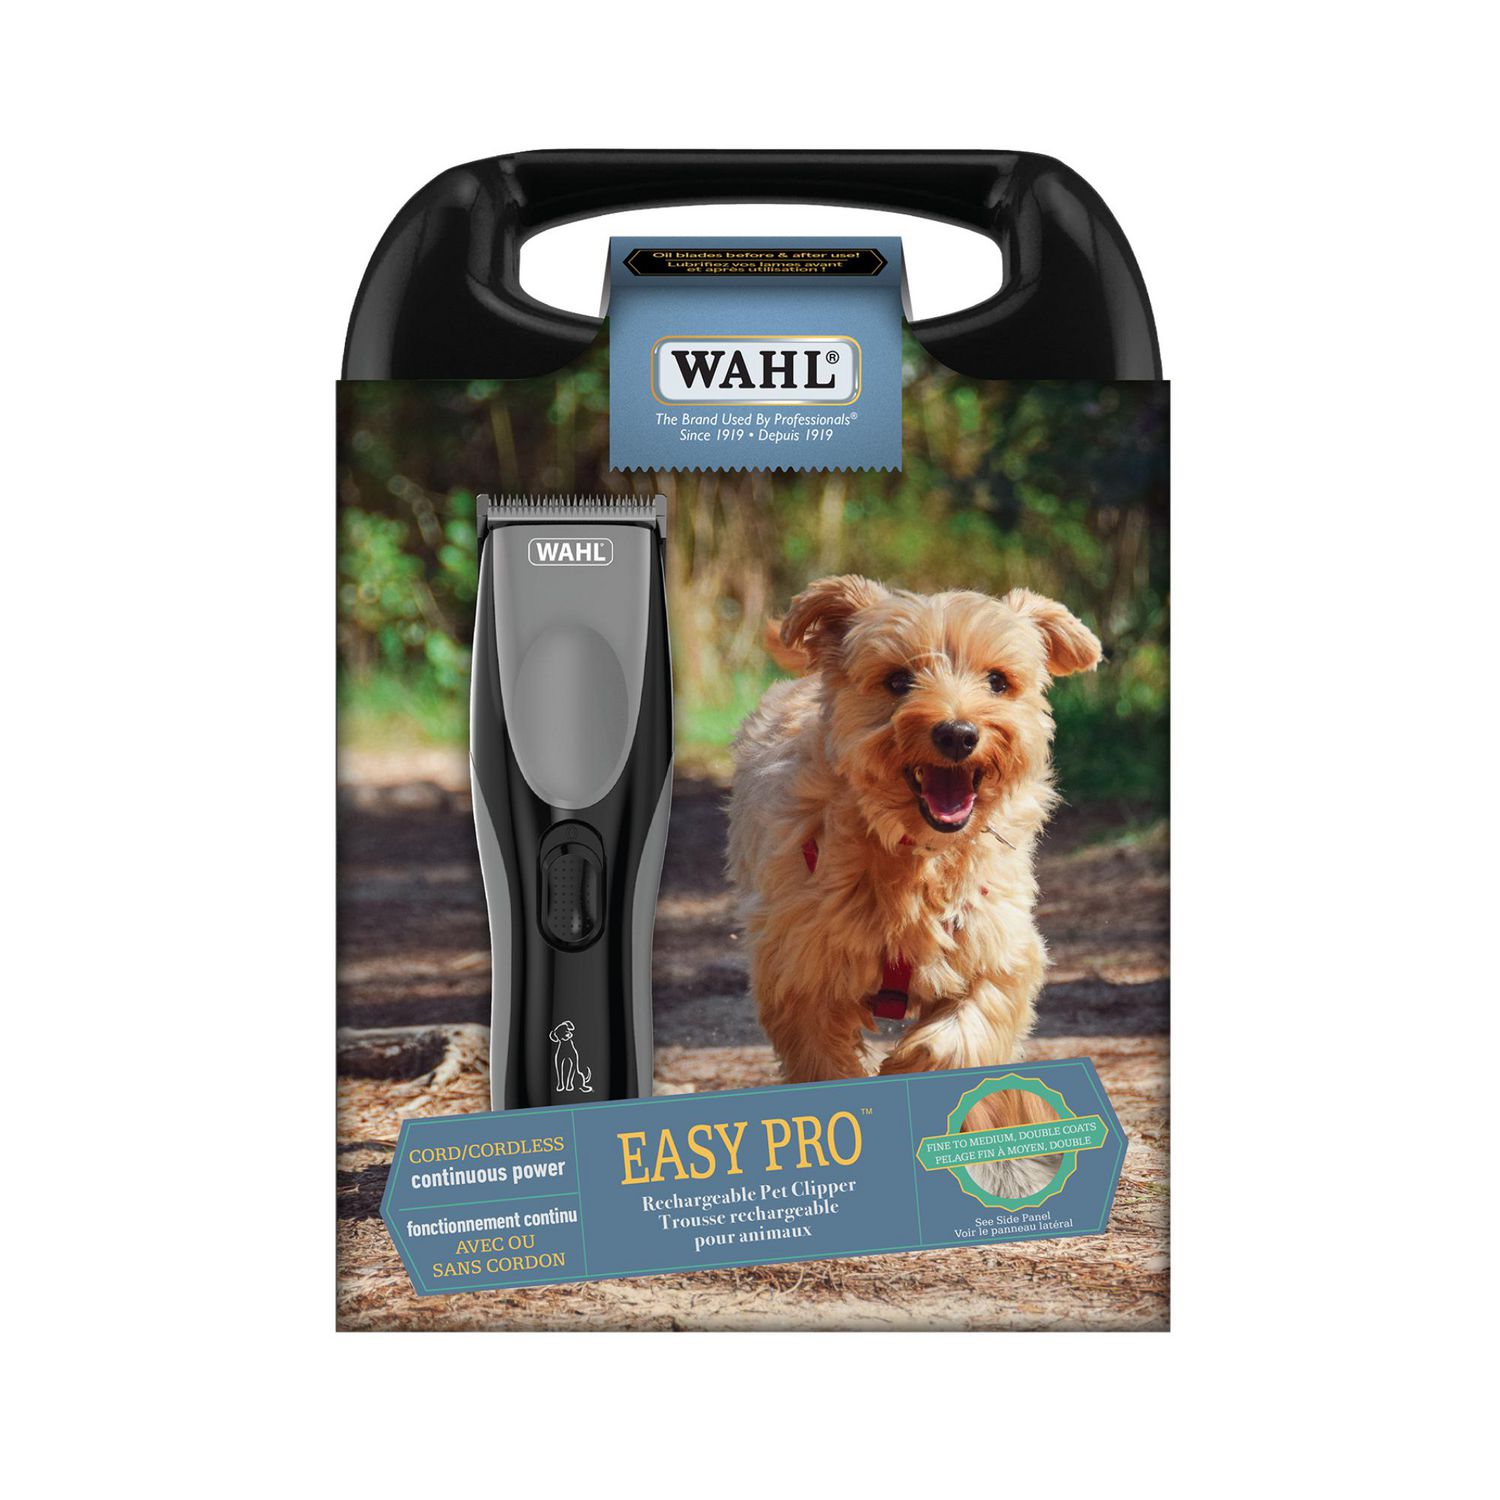 Wahl Easy Pro Dog Clipper Kit, Cord/cordless for total freedom of